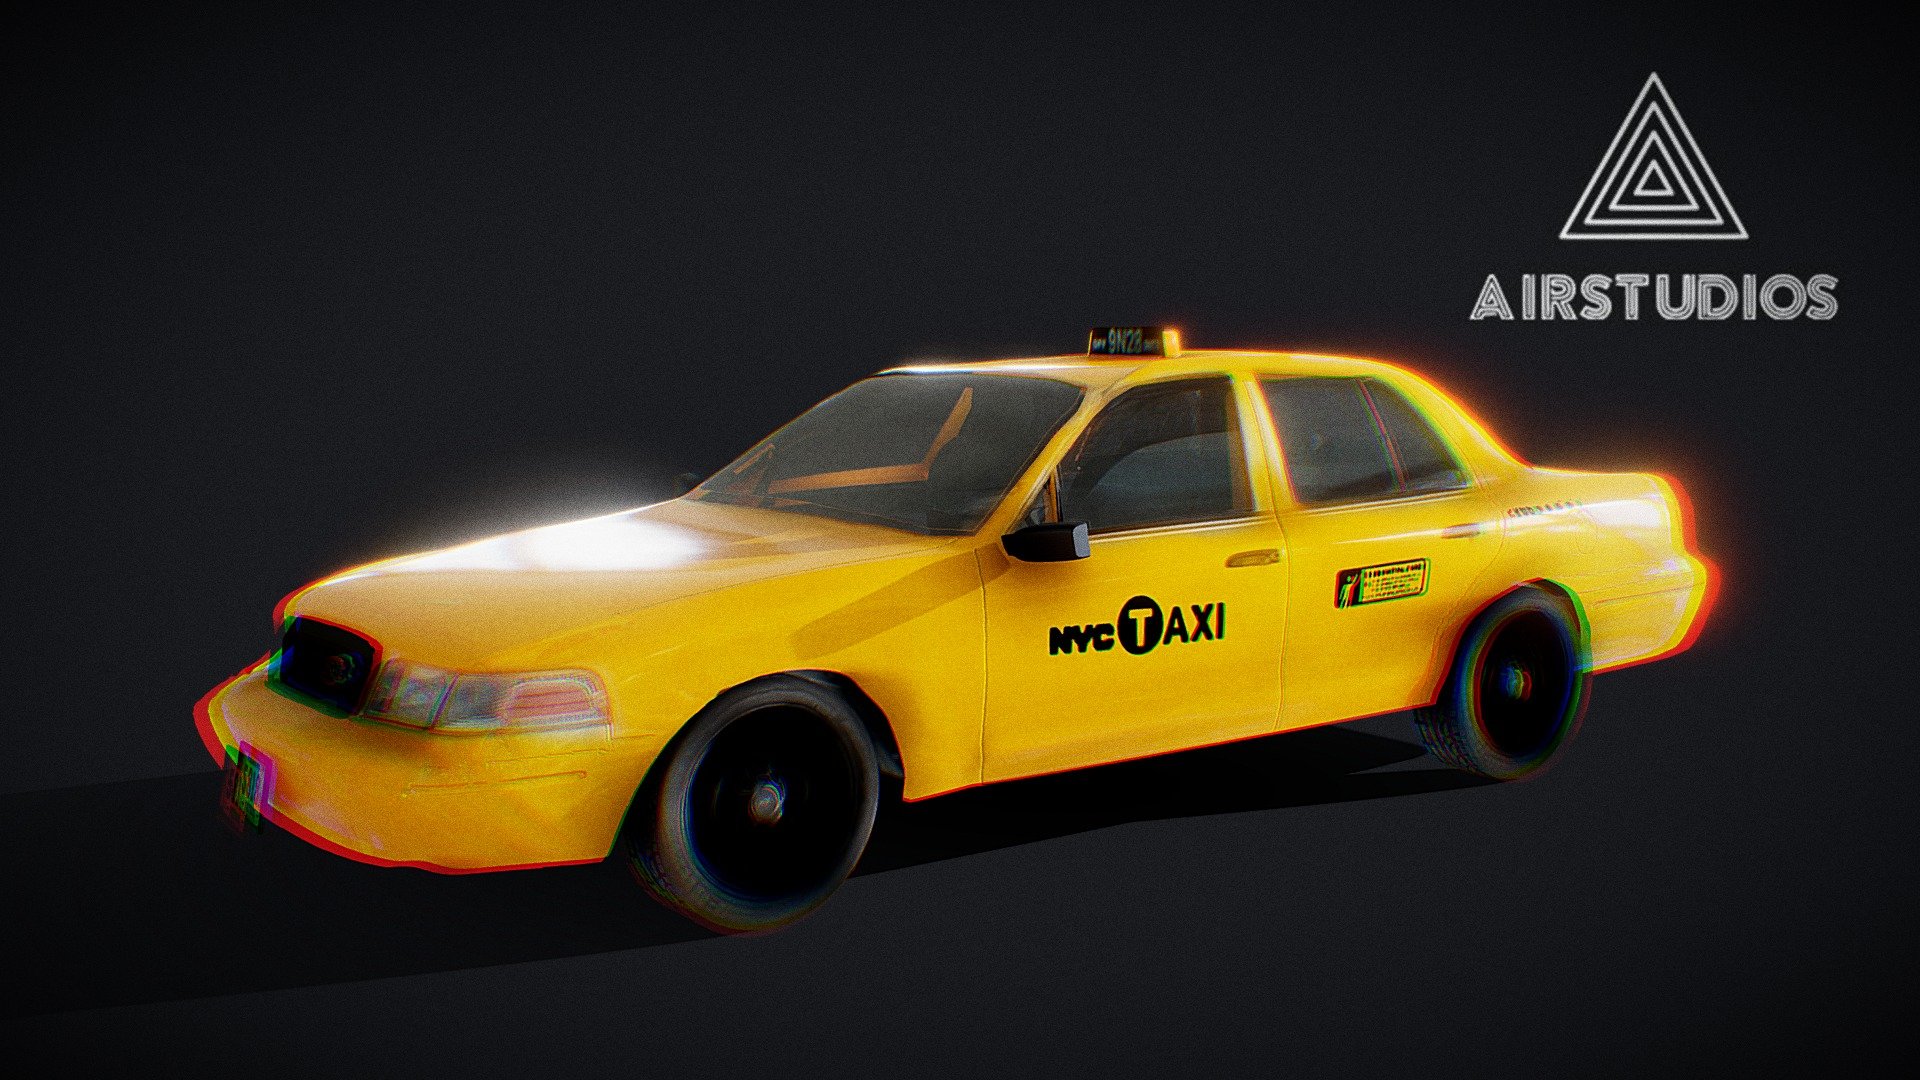 New York Taxi Yellow Cab

Made in Blender - New York Taxi Yellow Cab - Buy Royalty Free 3D model by AirStudios (@airstudios3d) 3d model